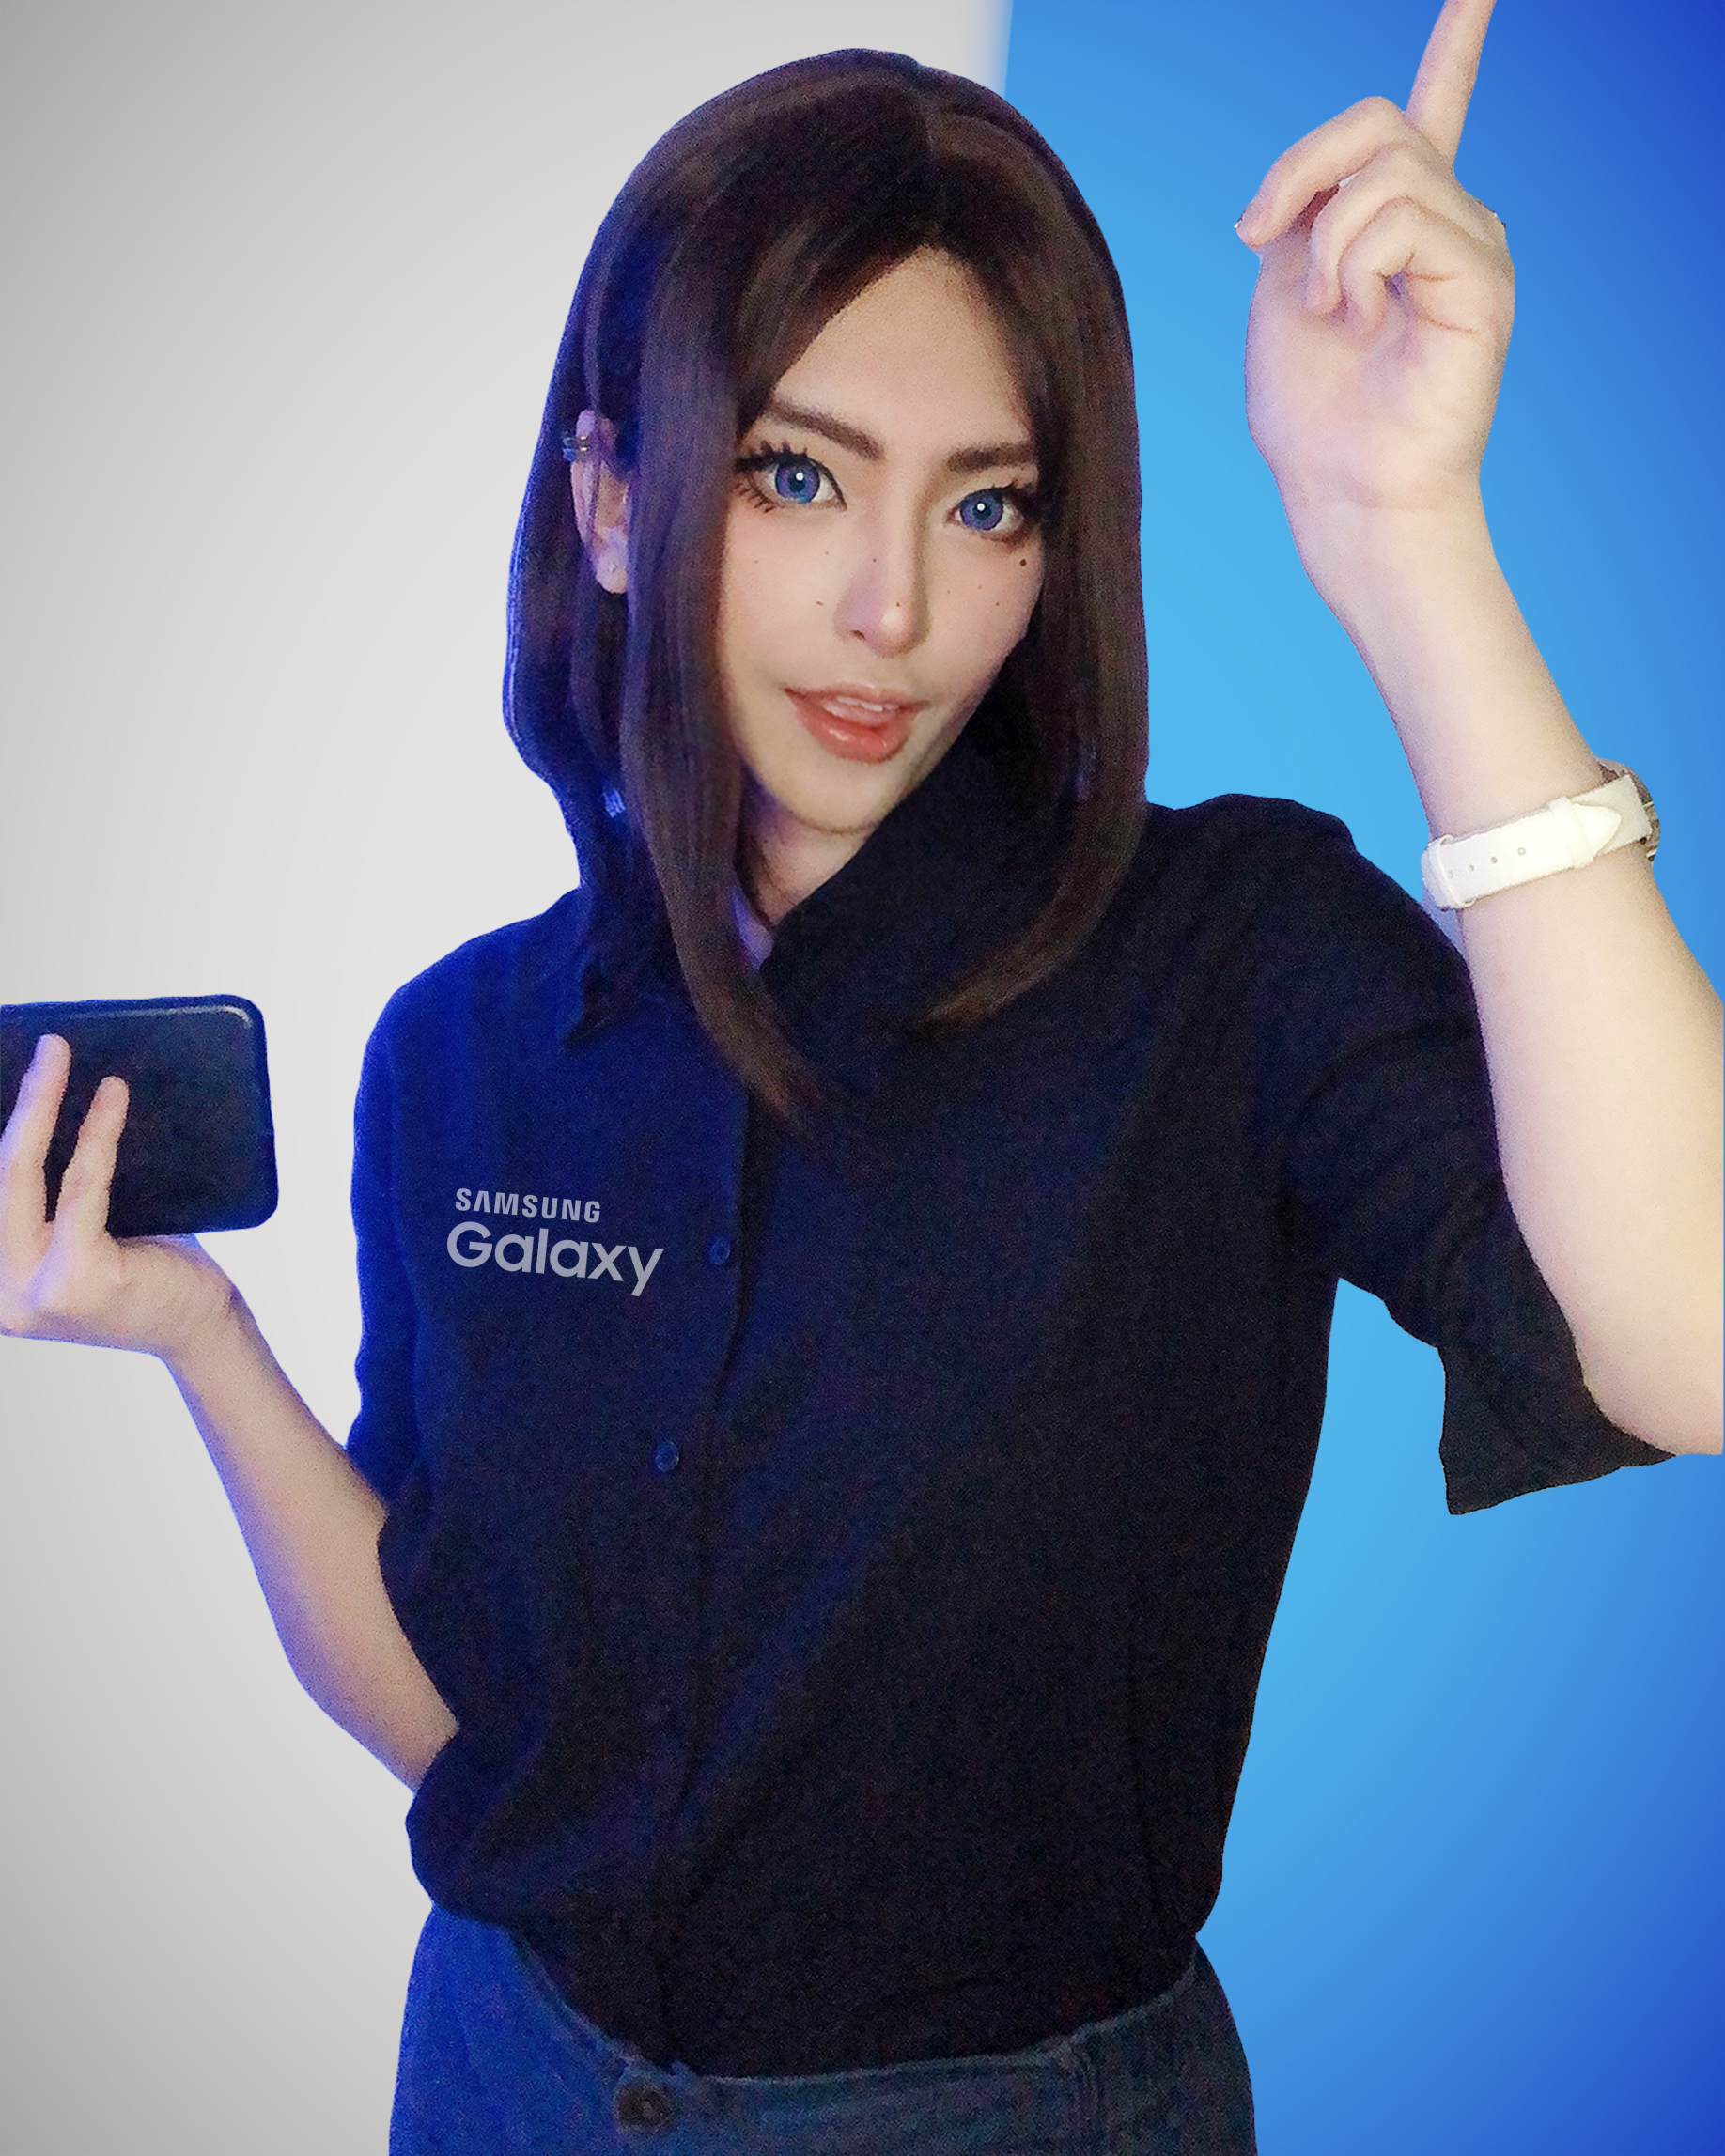 Samsung's Alleged New Virtual Assistant is Inspiring Tons of Cosplay